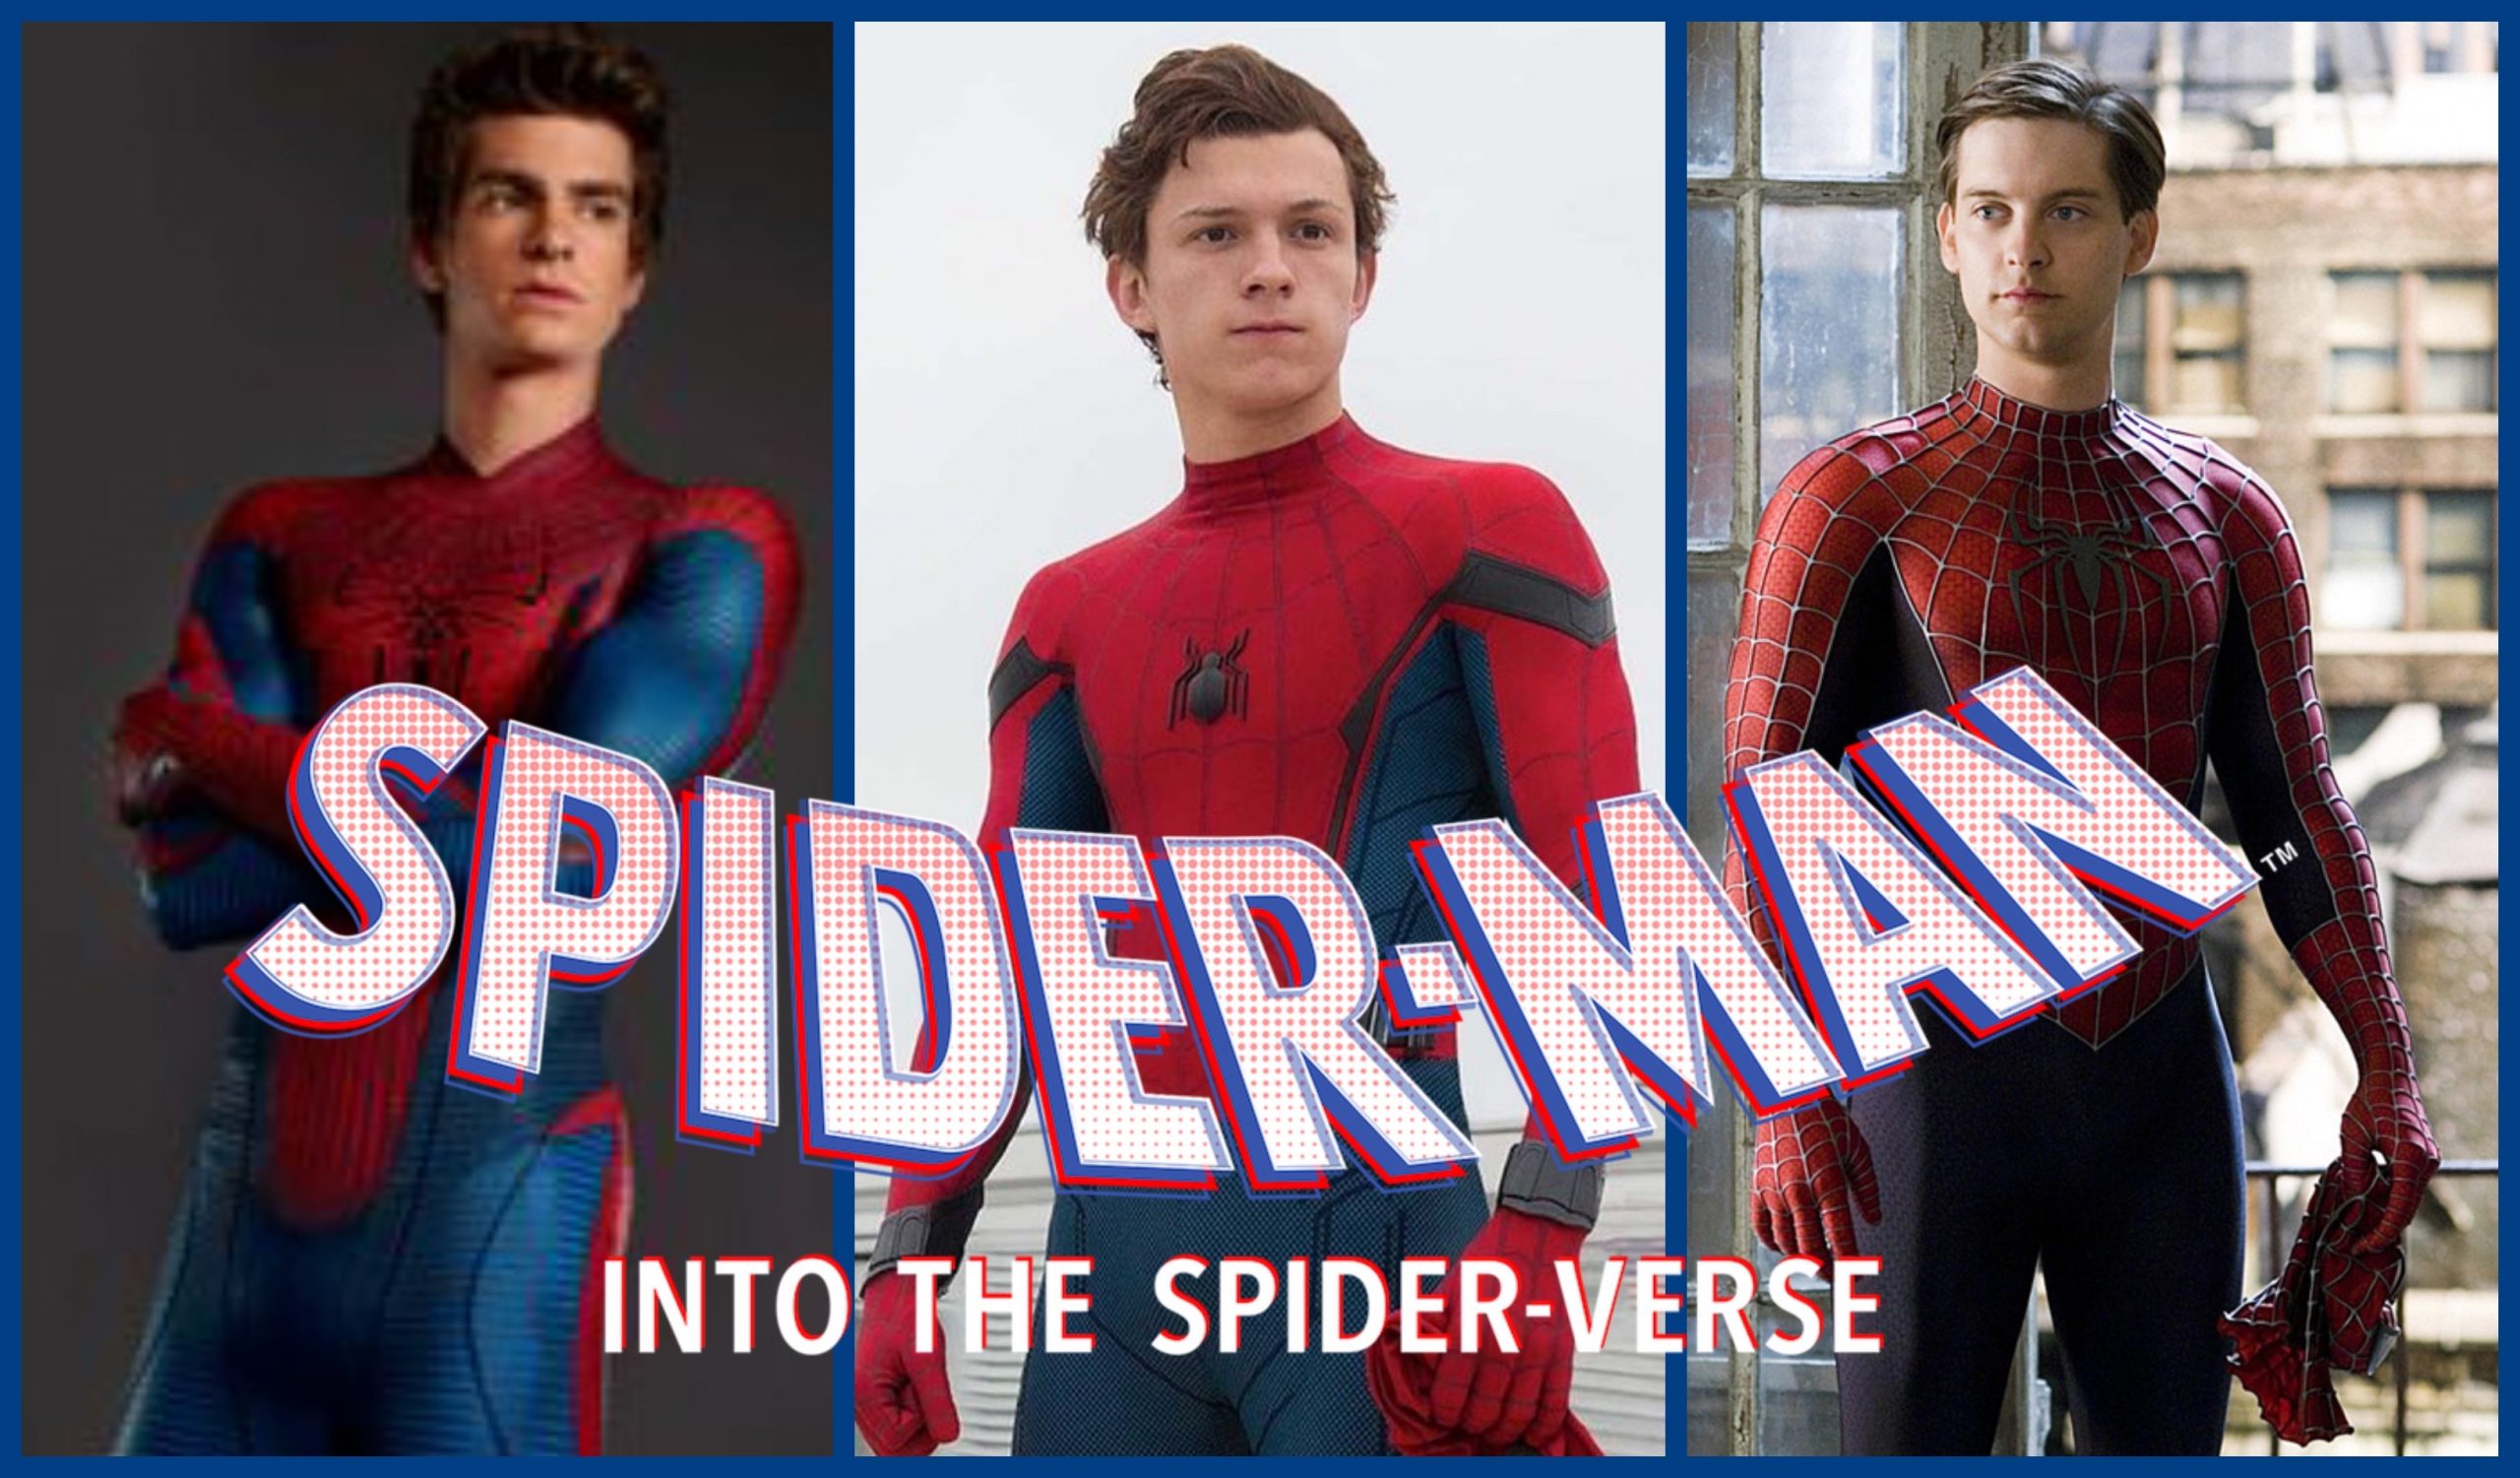 ‘Spider-Man: Into the Spider-Verse’ Almost Featured the 3 Live-Action ‘Spider-Man’ Actors